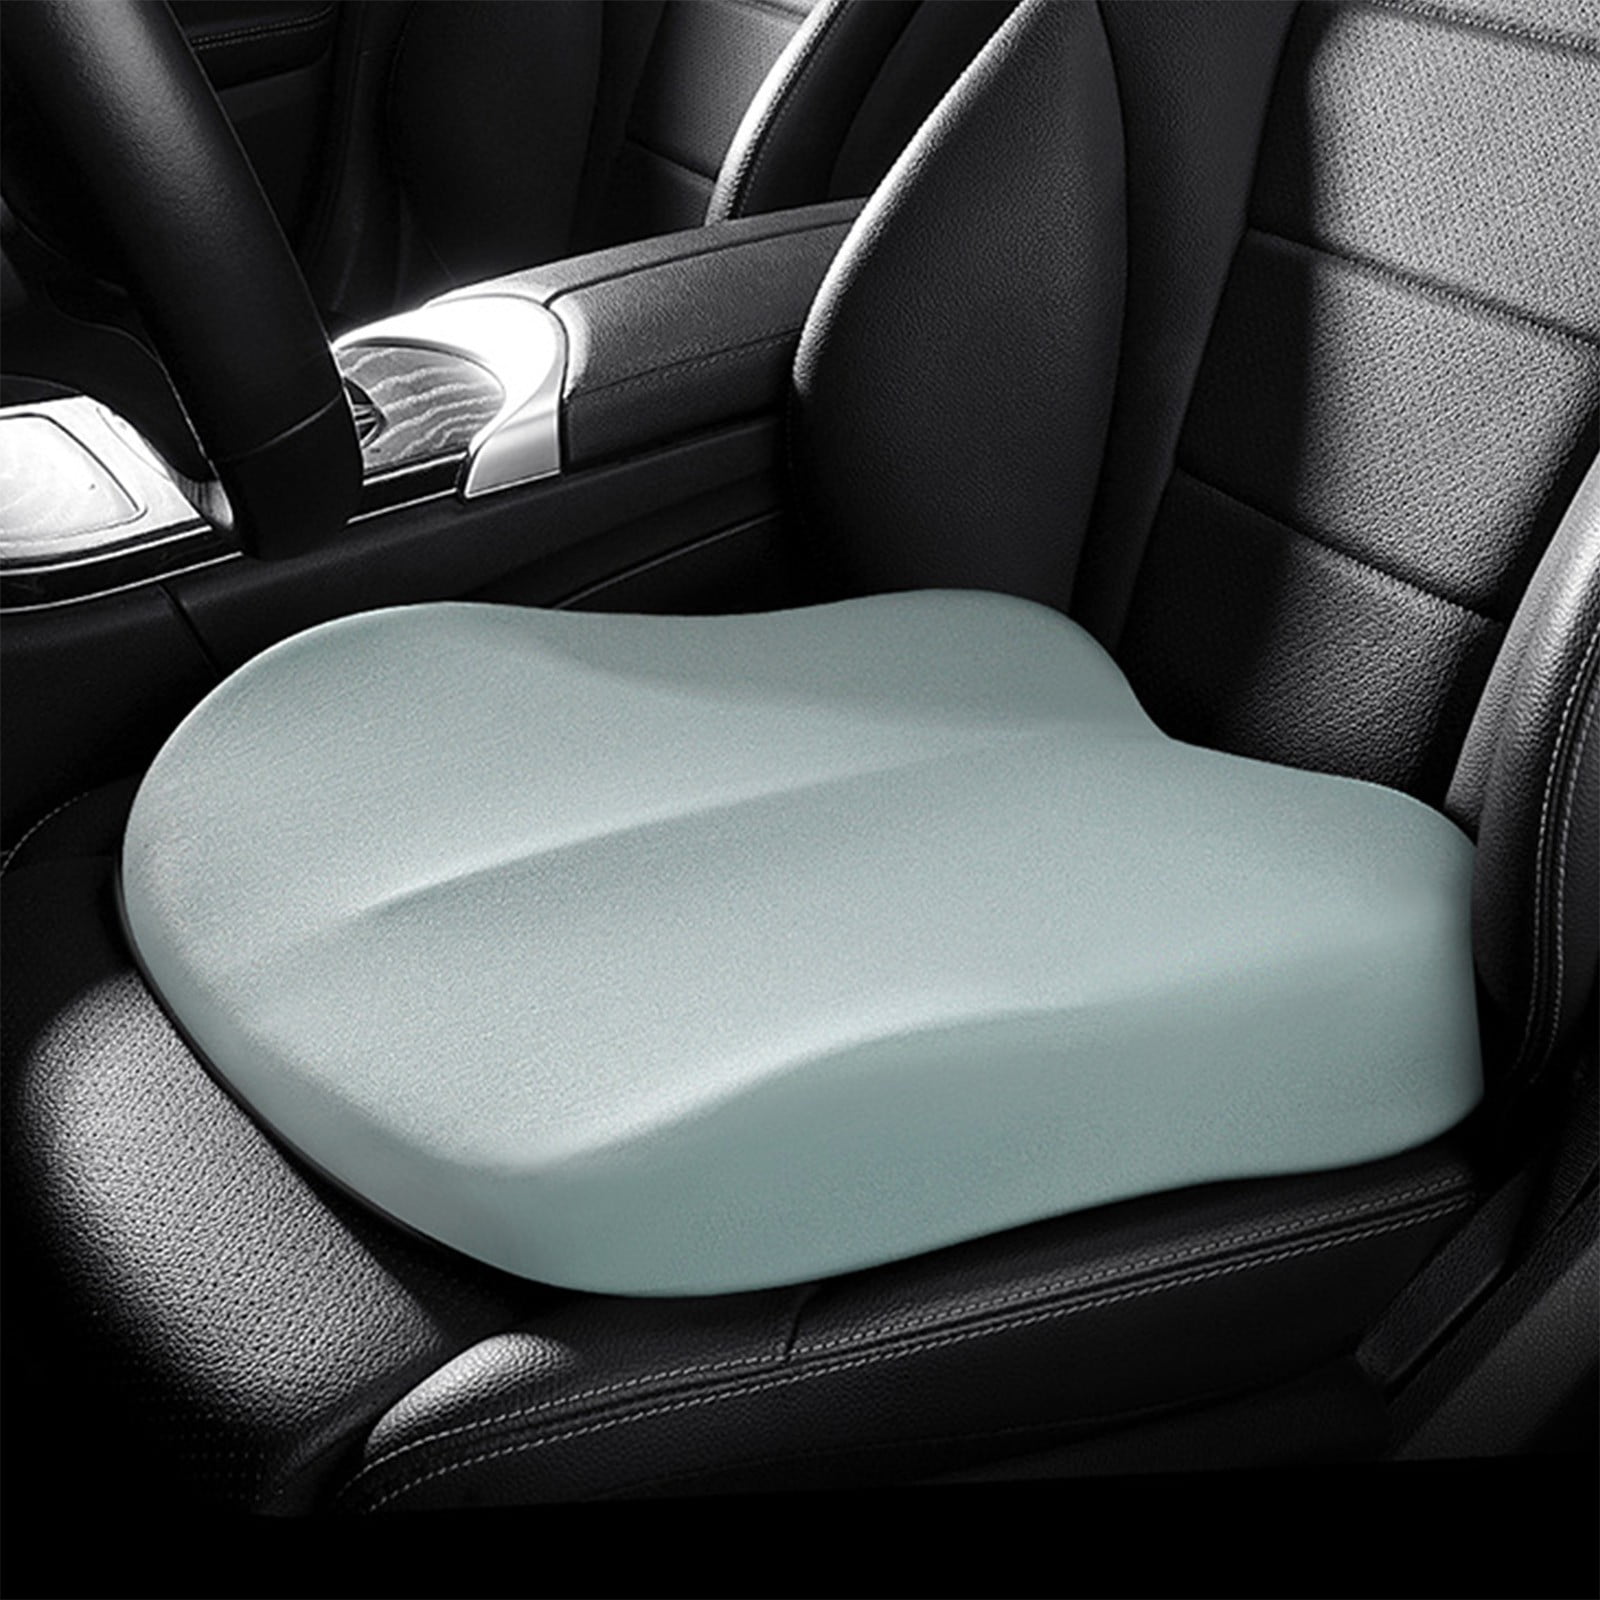 Kingleting Car Seat Cushion, Driver Seat Cushion for Height, Universal Fit for Most for Auto SUV Truck,Provides Good Driving Visibility (Gray), Size